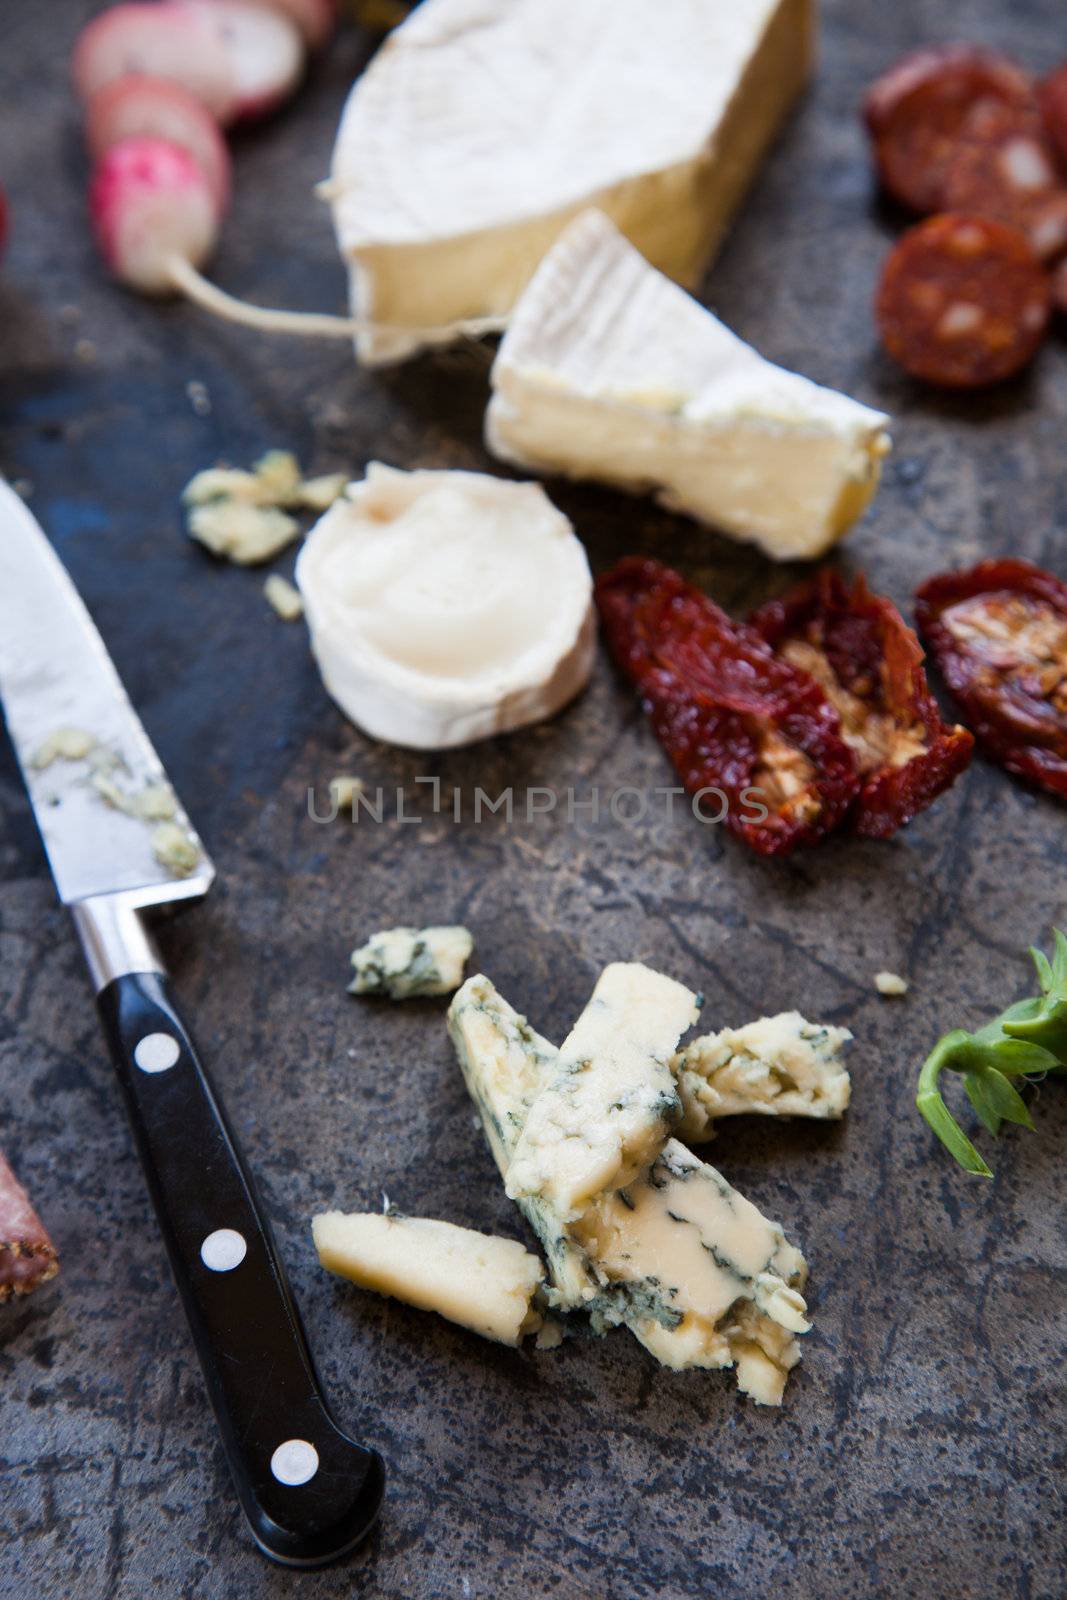 Cheese platter by Fotosmurf